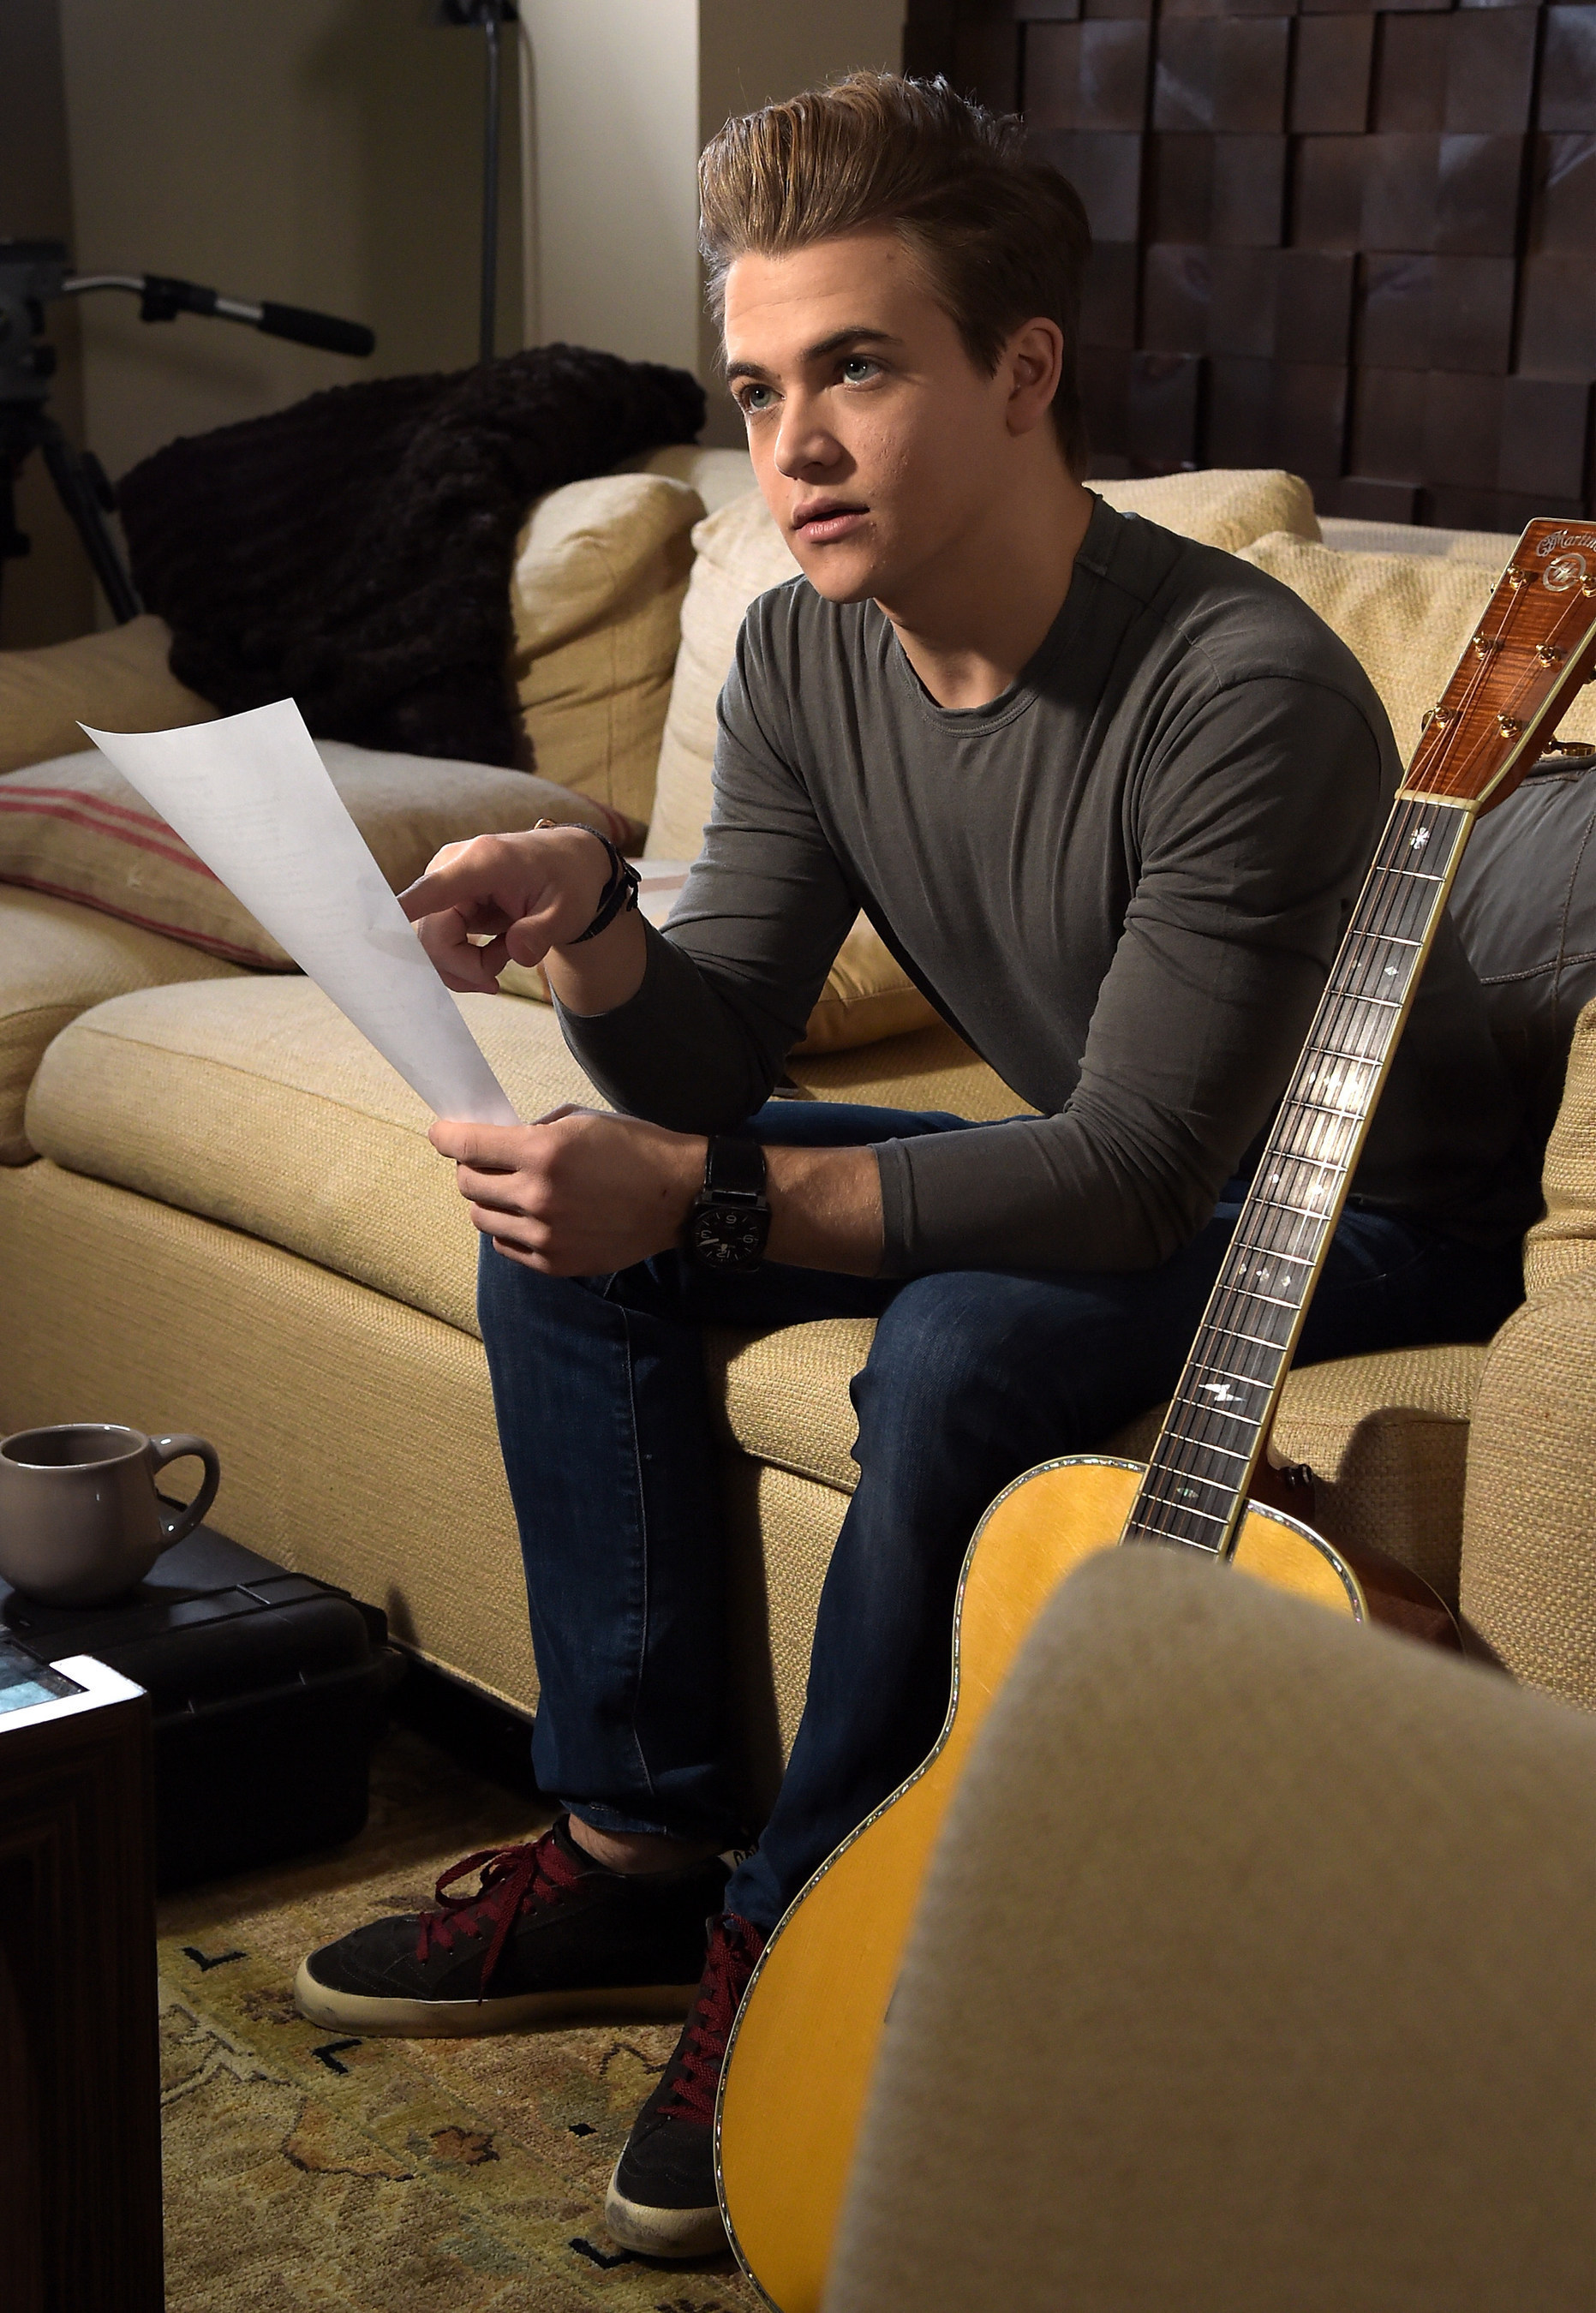 Whirlpool Brand and Award-Winning Artist Hunter Hayes Celebrate the Power of Care on Feb. 8